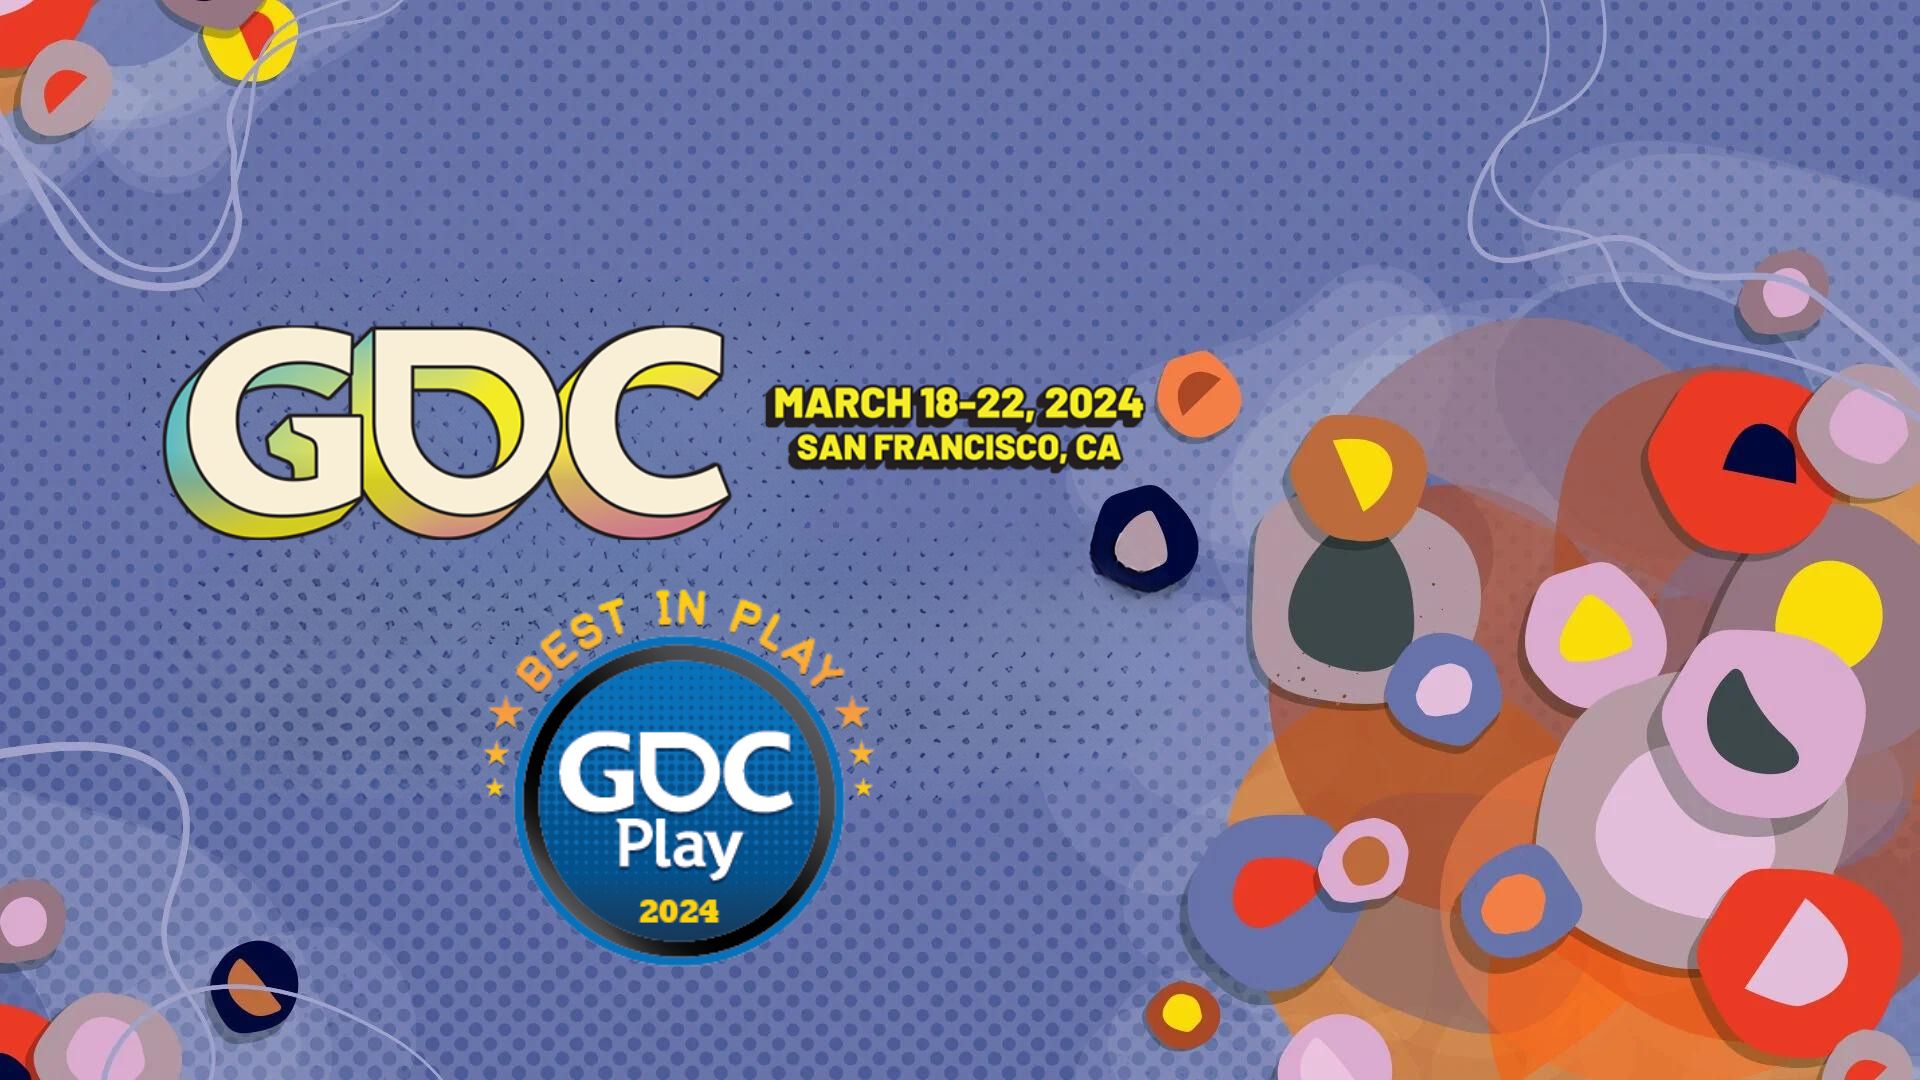 GDC Best in Play